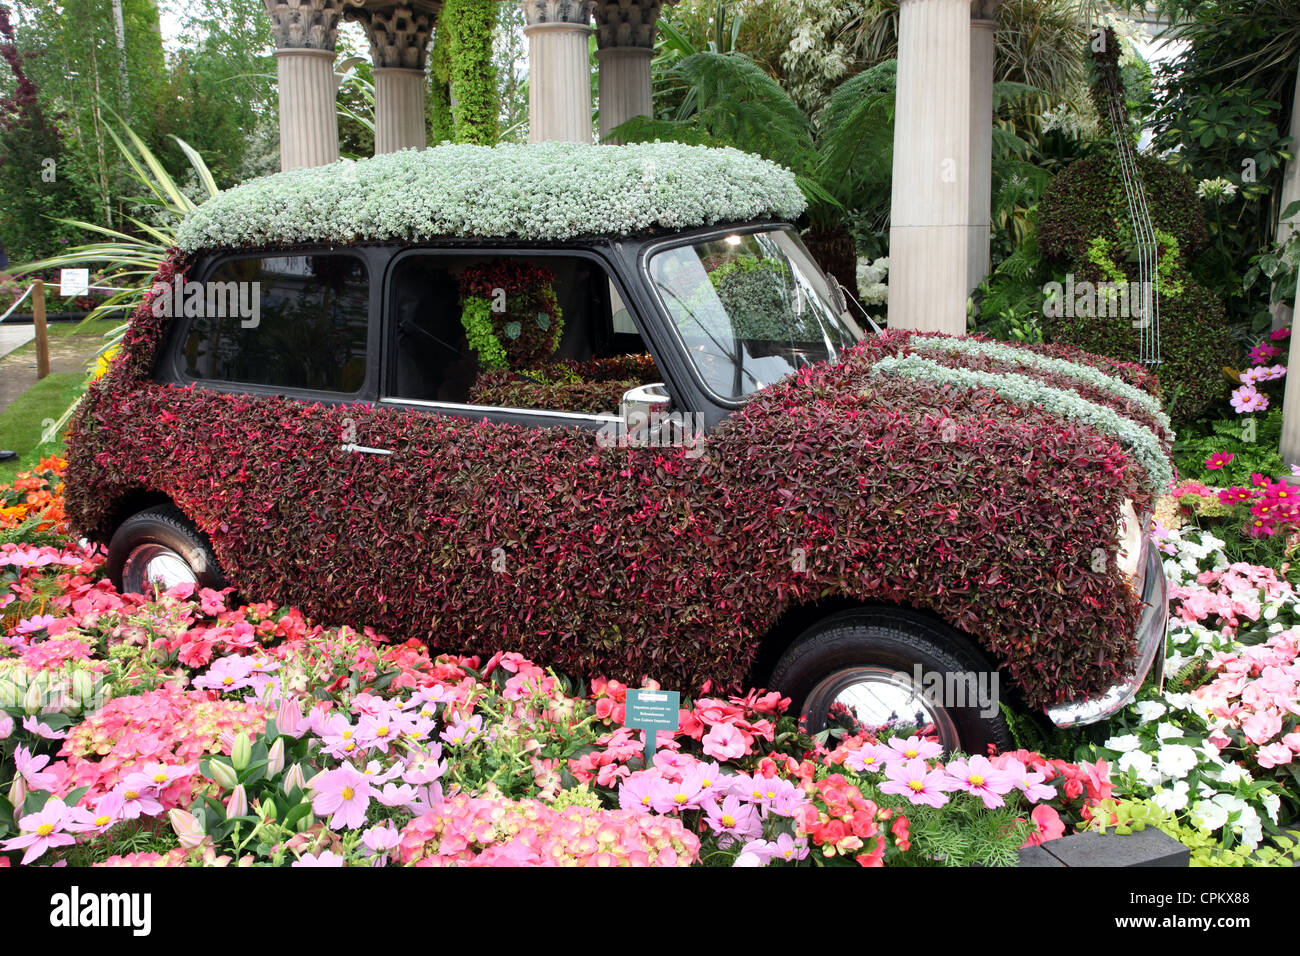 Plant covered Mini, Birmingham City Council Display, Chelsea Flower Show 2012 Stock Photo